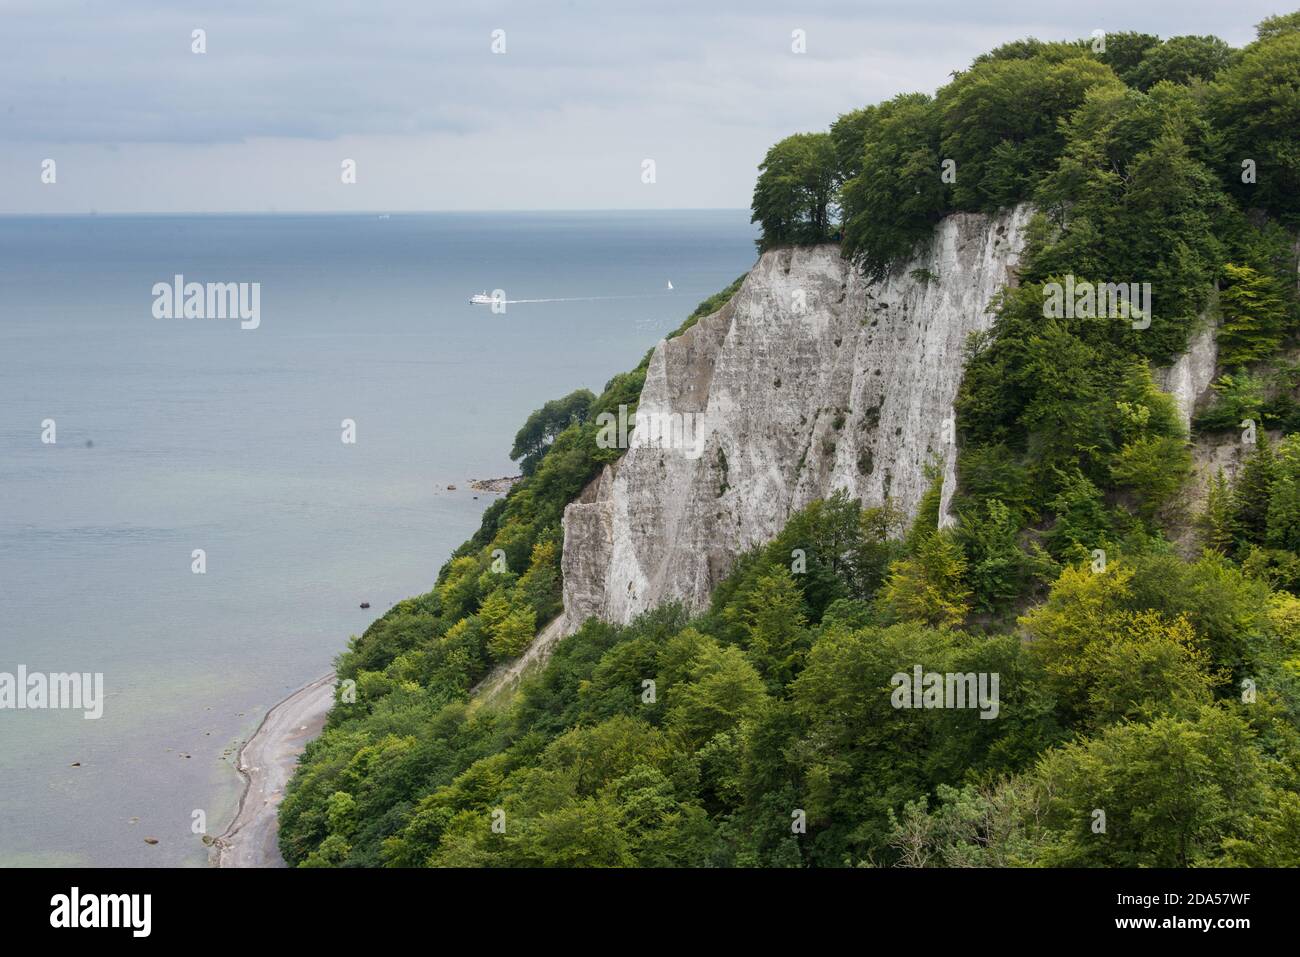 The famous chalk cliffs of the Victoria-view at Rügen's Stubbenkammer nature reserve Stock Photo